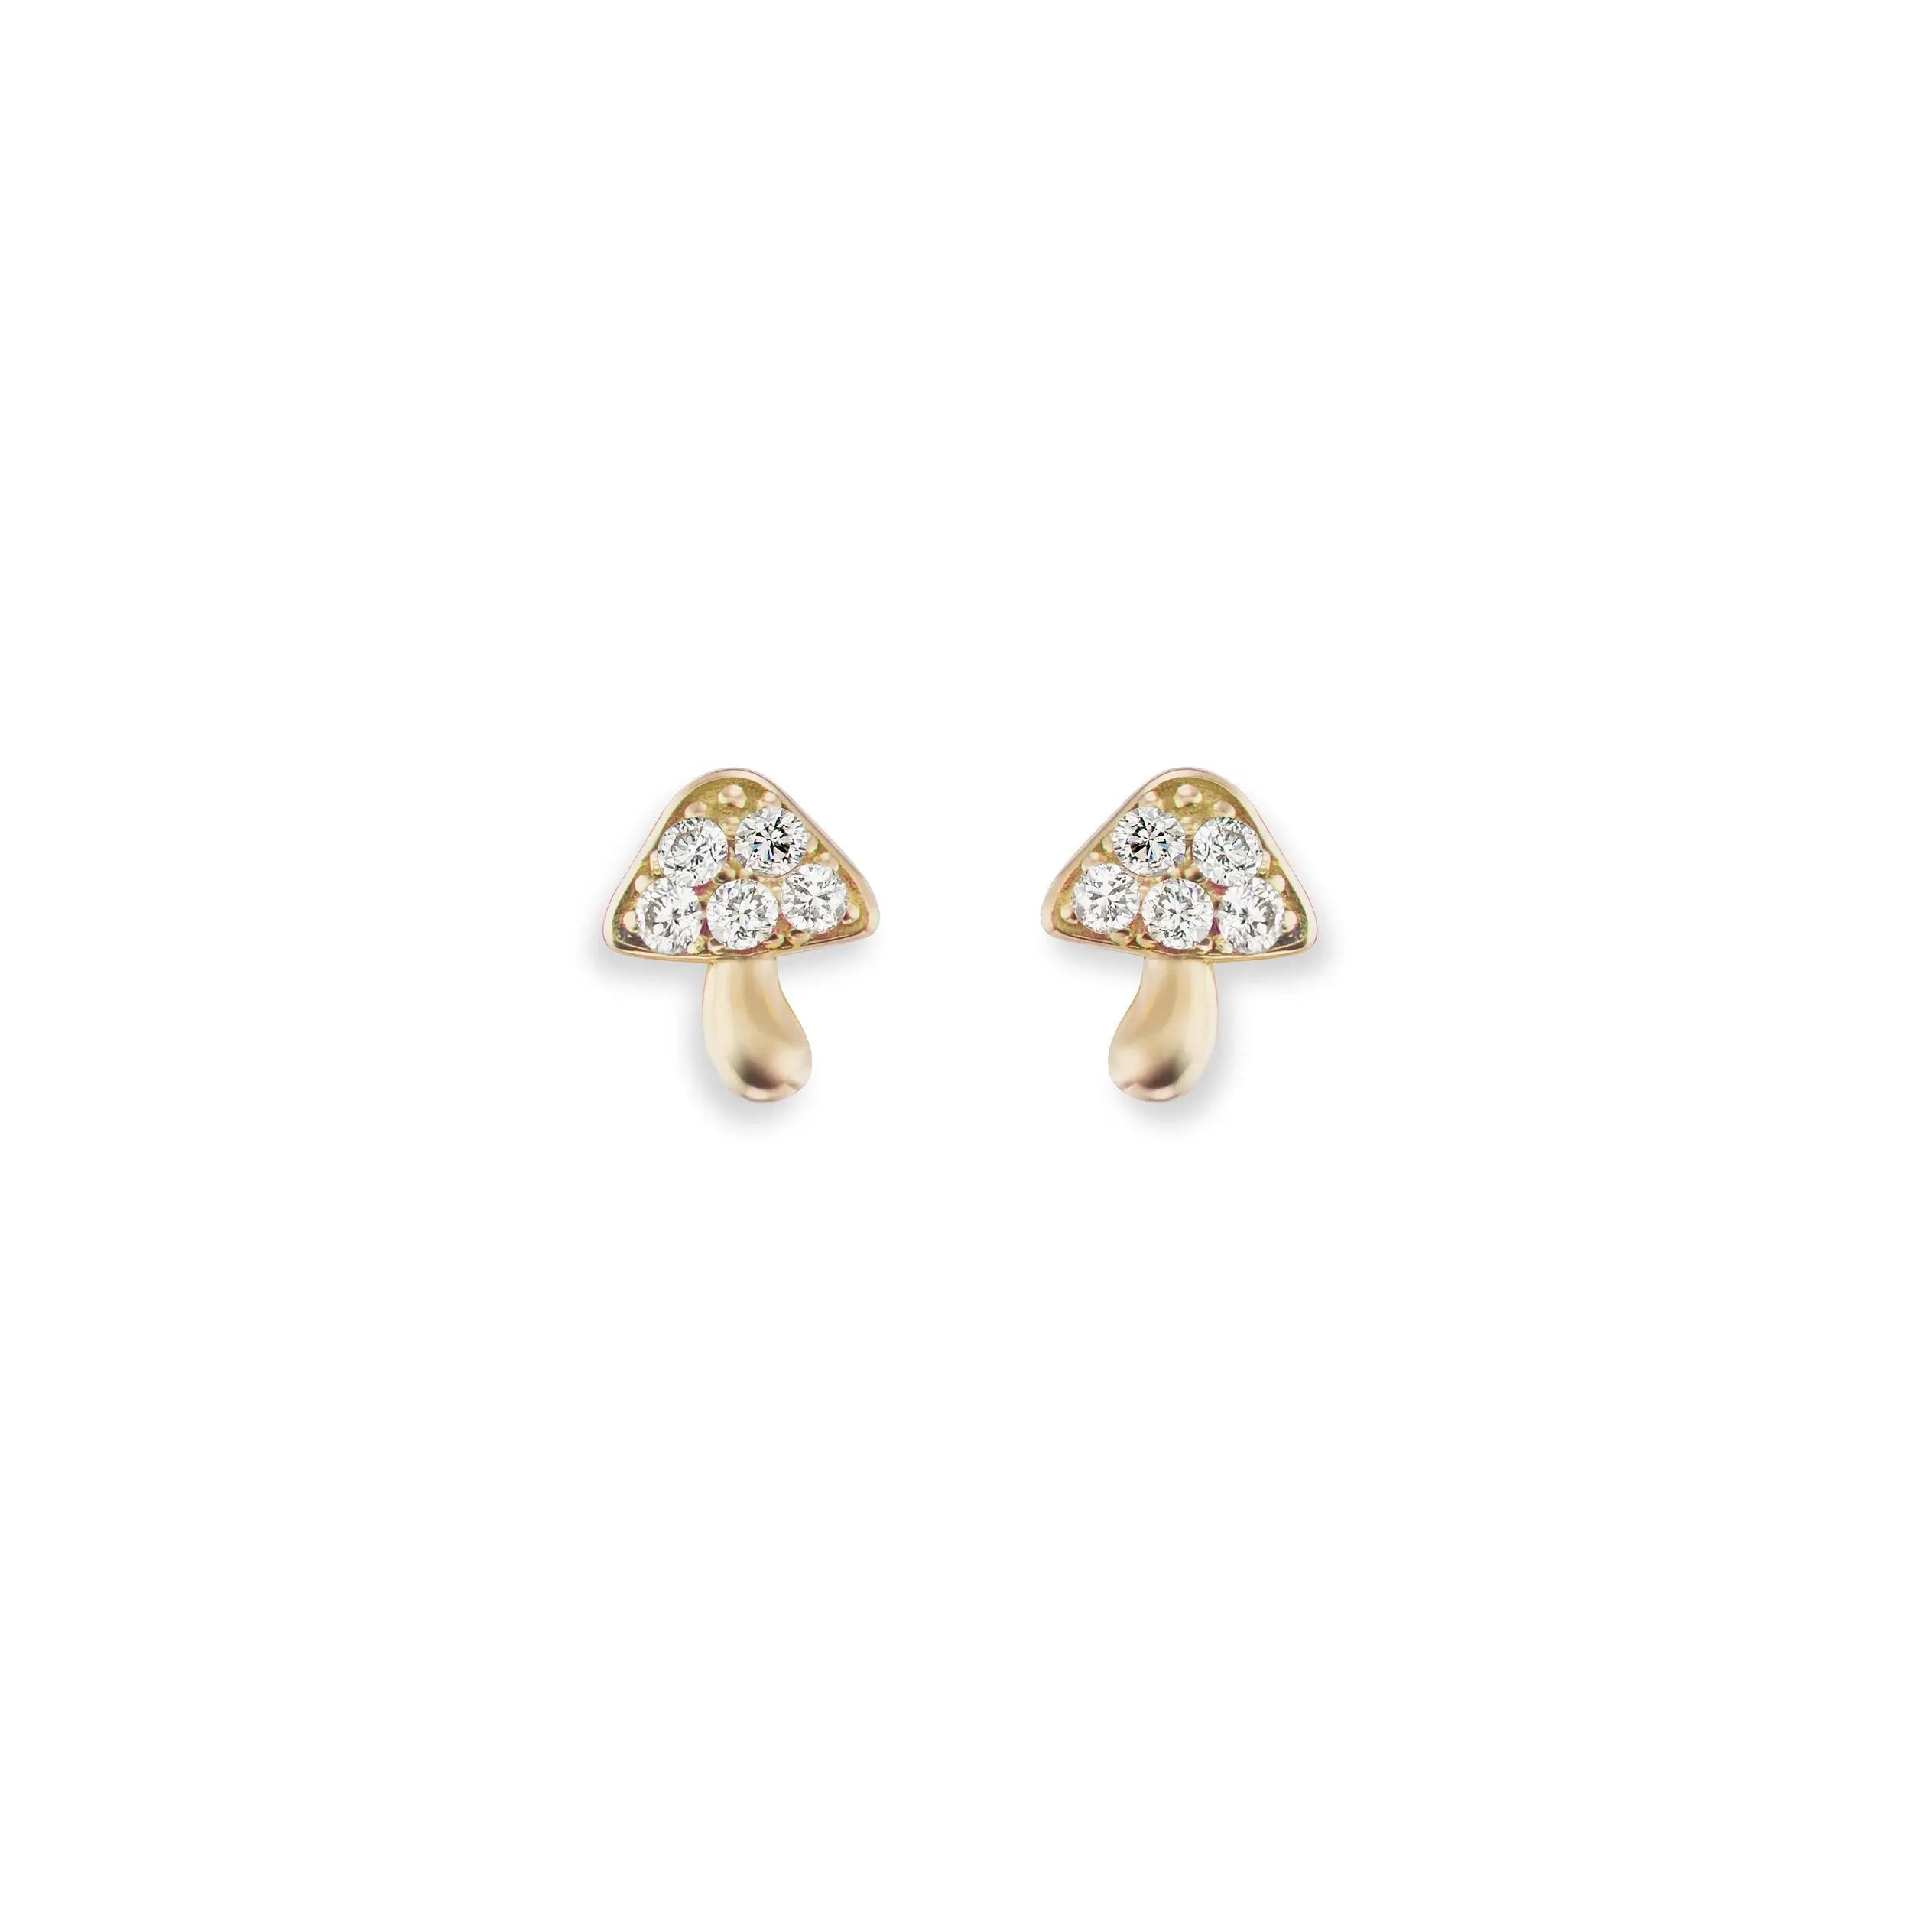 Brent Neale earrings were inspired by fairy tales.  The 18k yellow gold mushrooms are  set with brilliant white diamonds. Worn in a first or second piercing, these would be a fun addition to your collection. The measure 4.5mm x 5.5mm and 1mm diameter each. Sold as a pair.